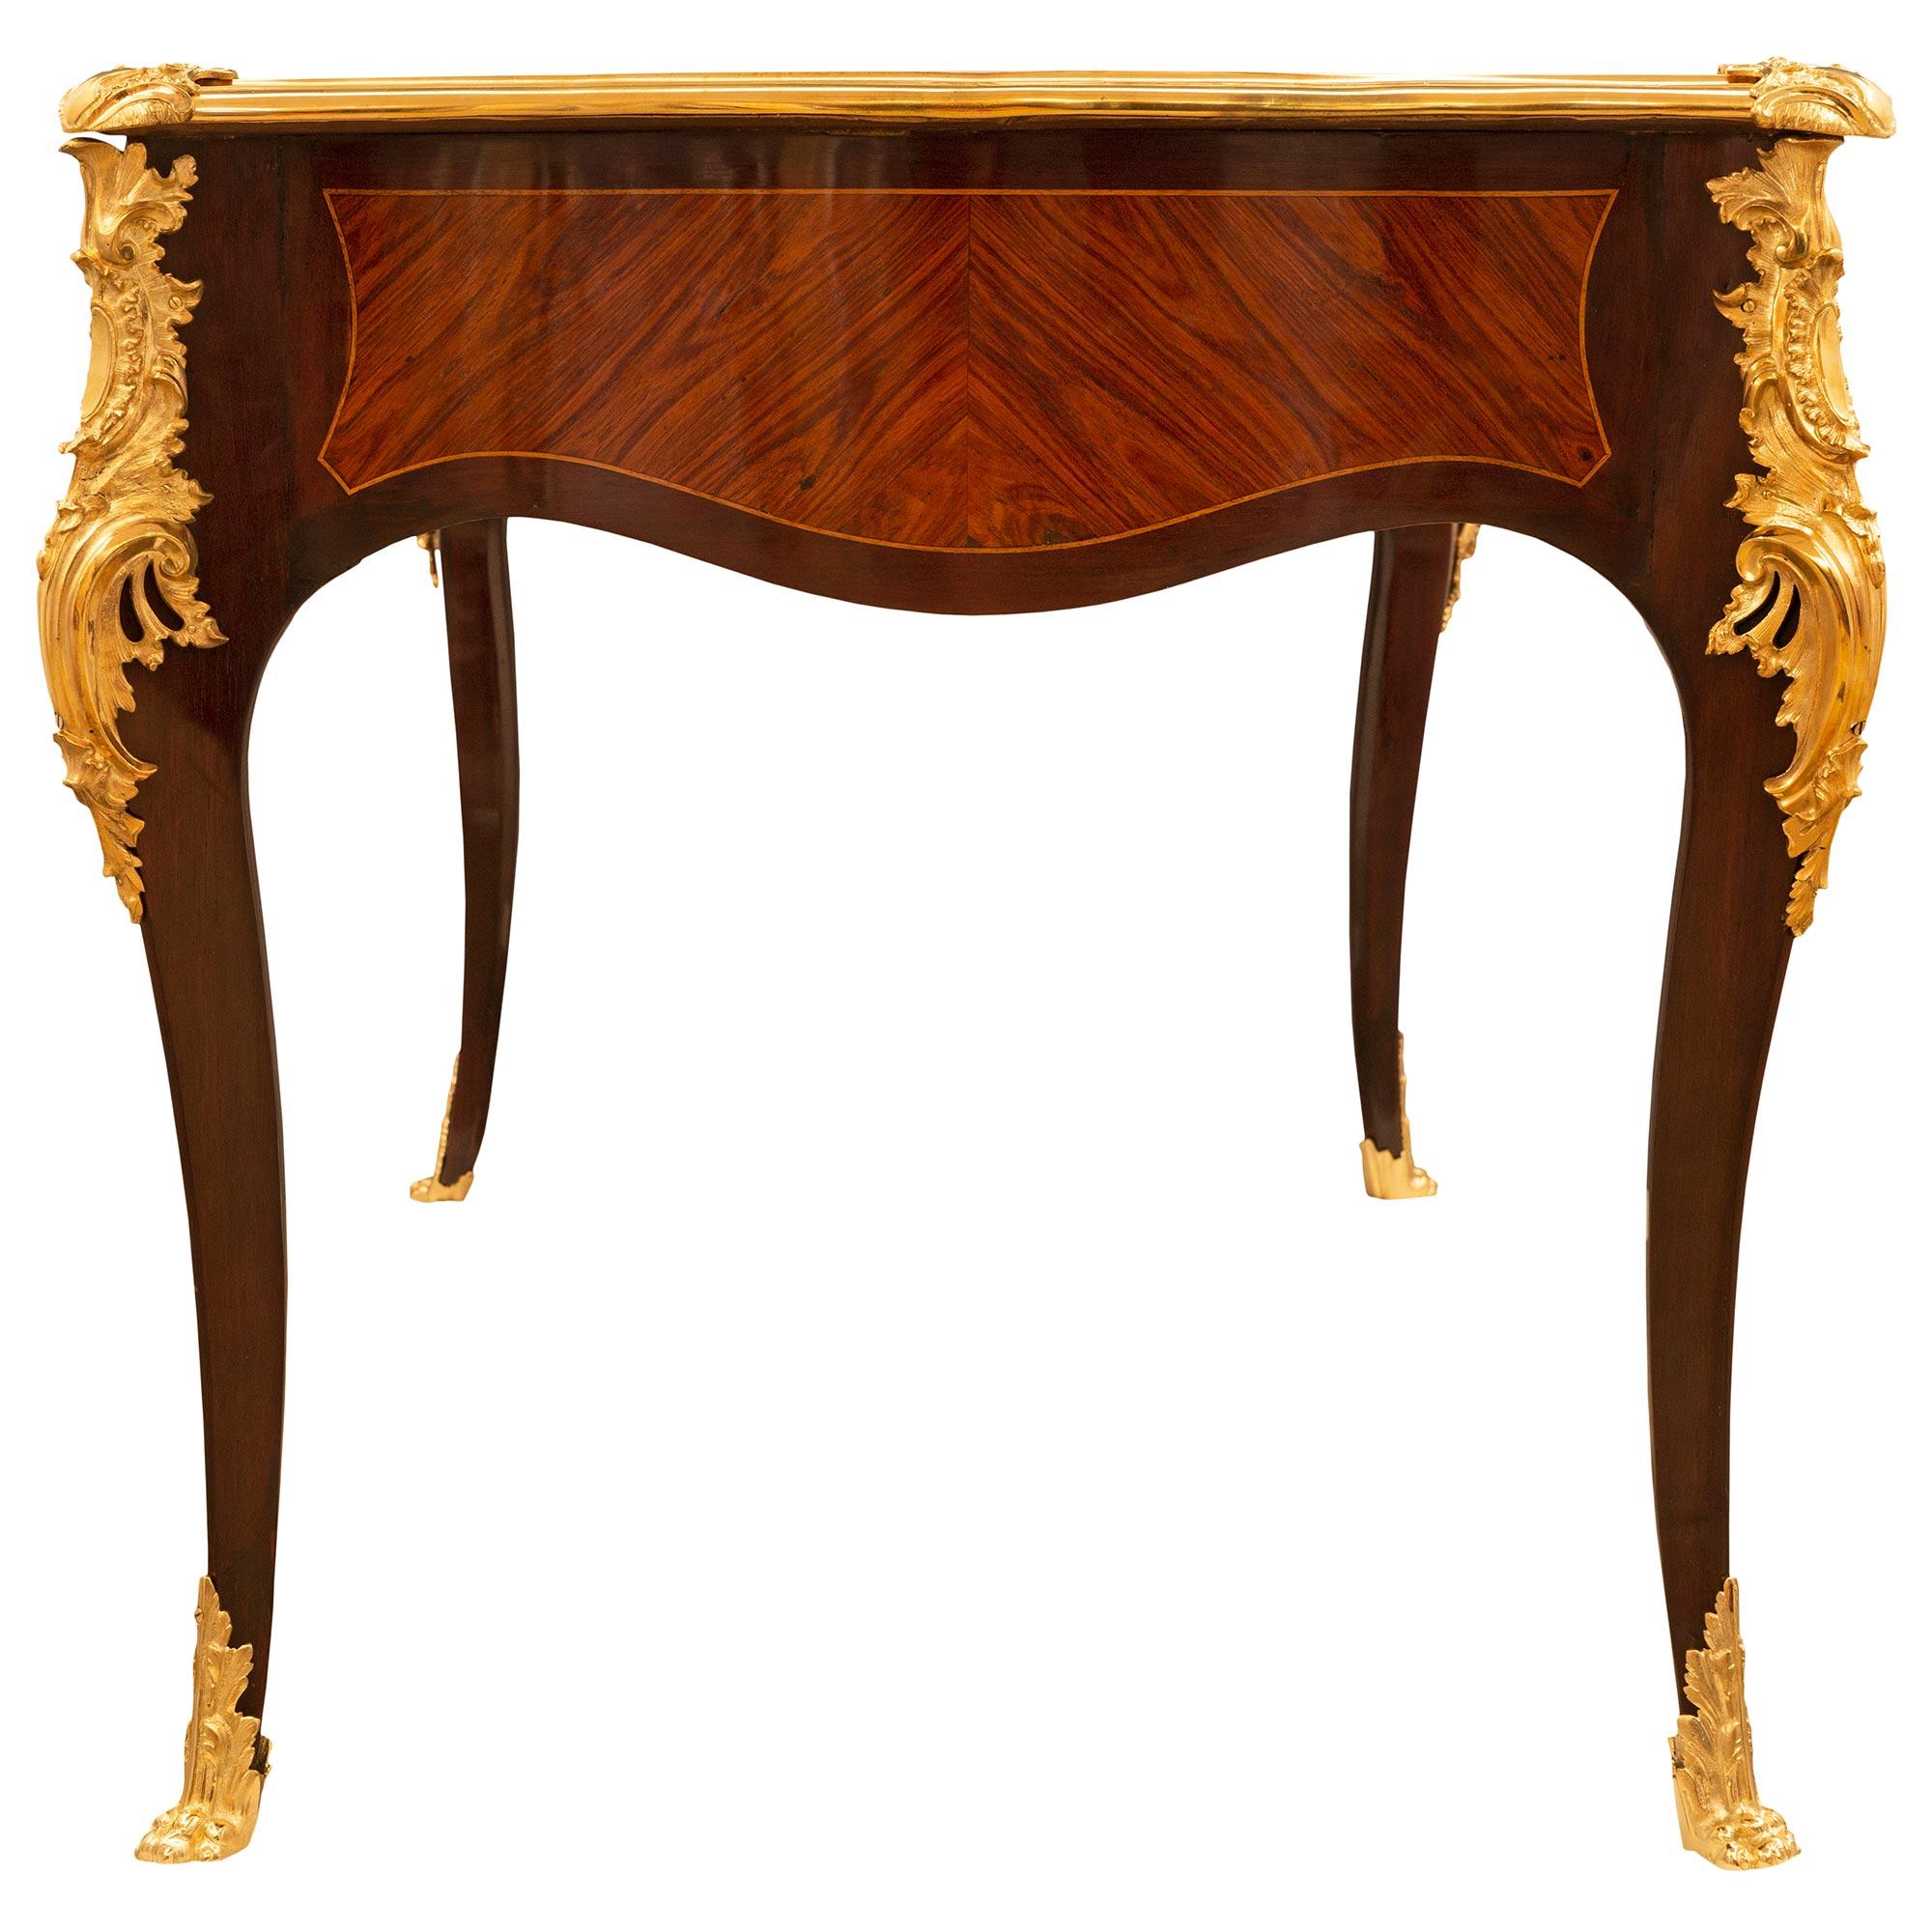 French 19th Century Louis XV St. Mahogany, Tulipwood and Ormolu Bureau Plat Desk In Good Condition For Sale In West Palm Beach, FL